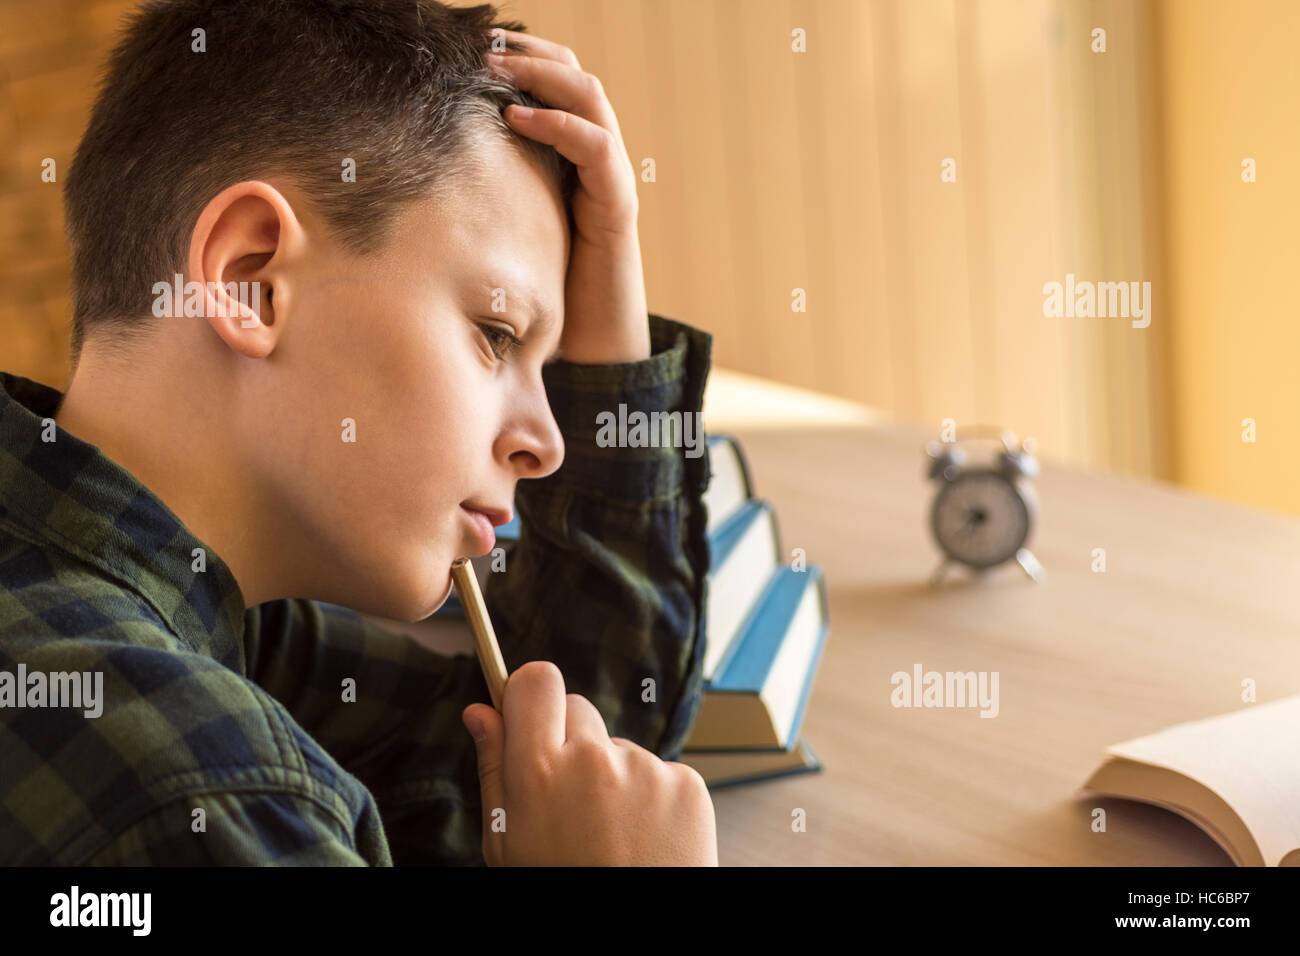 Young Boy Thinking Over a Book on Desk at Home Stock Photo